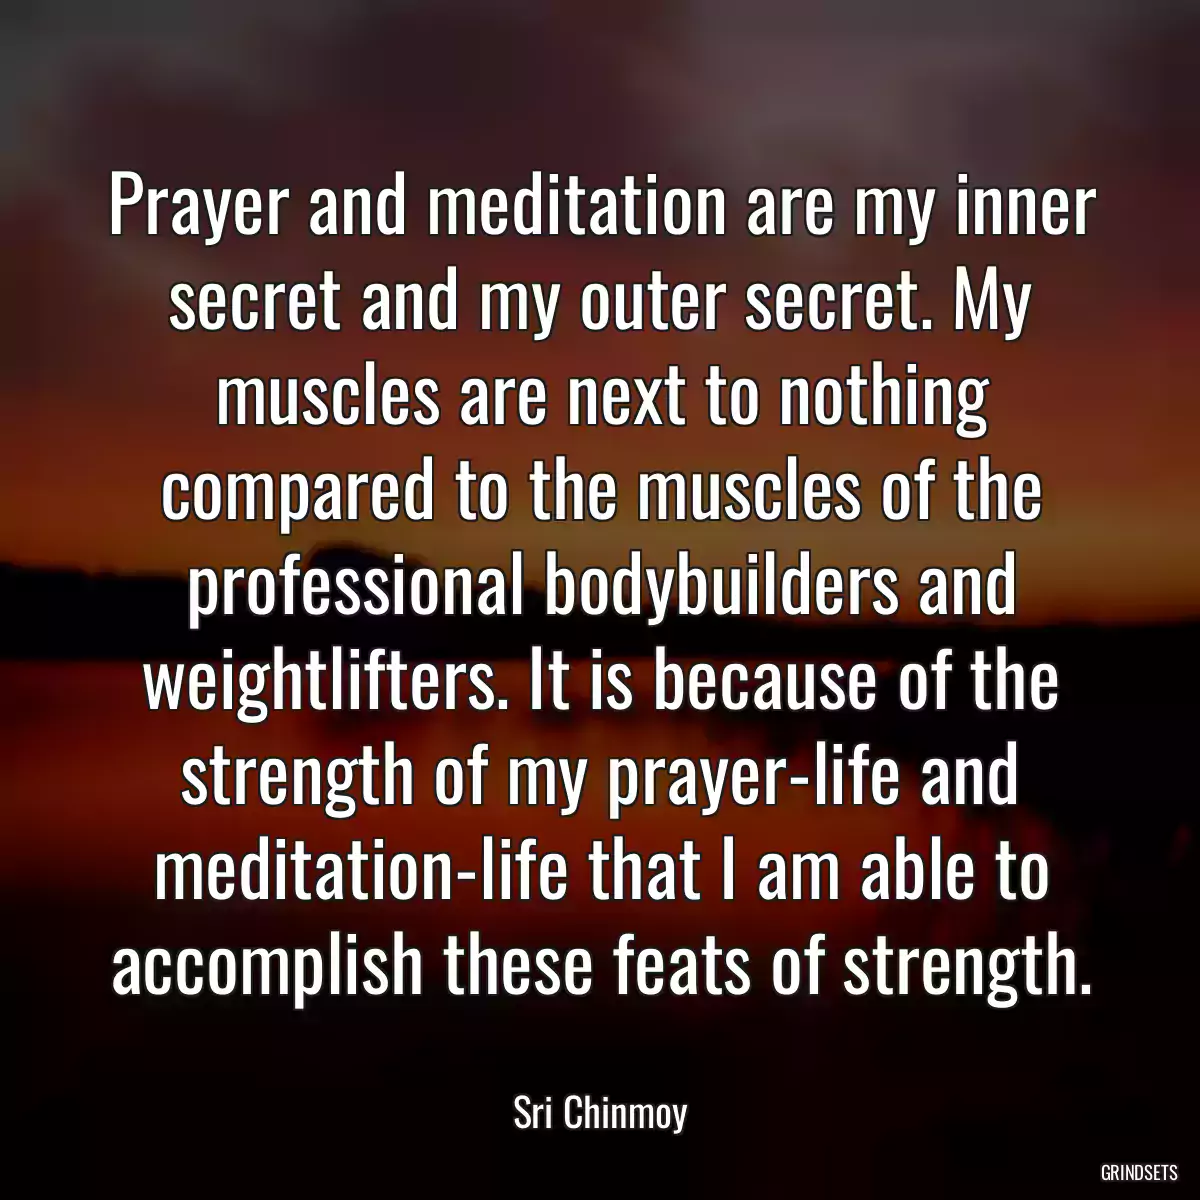 Prayer and meditation are my inner secret and my outer secret. My muscles are next to nothing compared to the muscles of the professional bodybuilders and weightlifters. It is because of the strength of my prayer-life and meditation-life that I am able to accomplish these feats of strength.